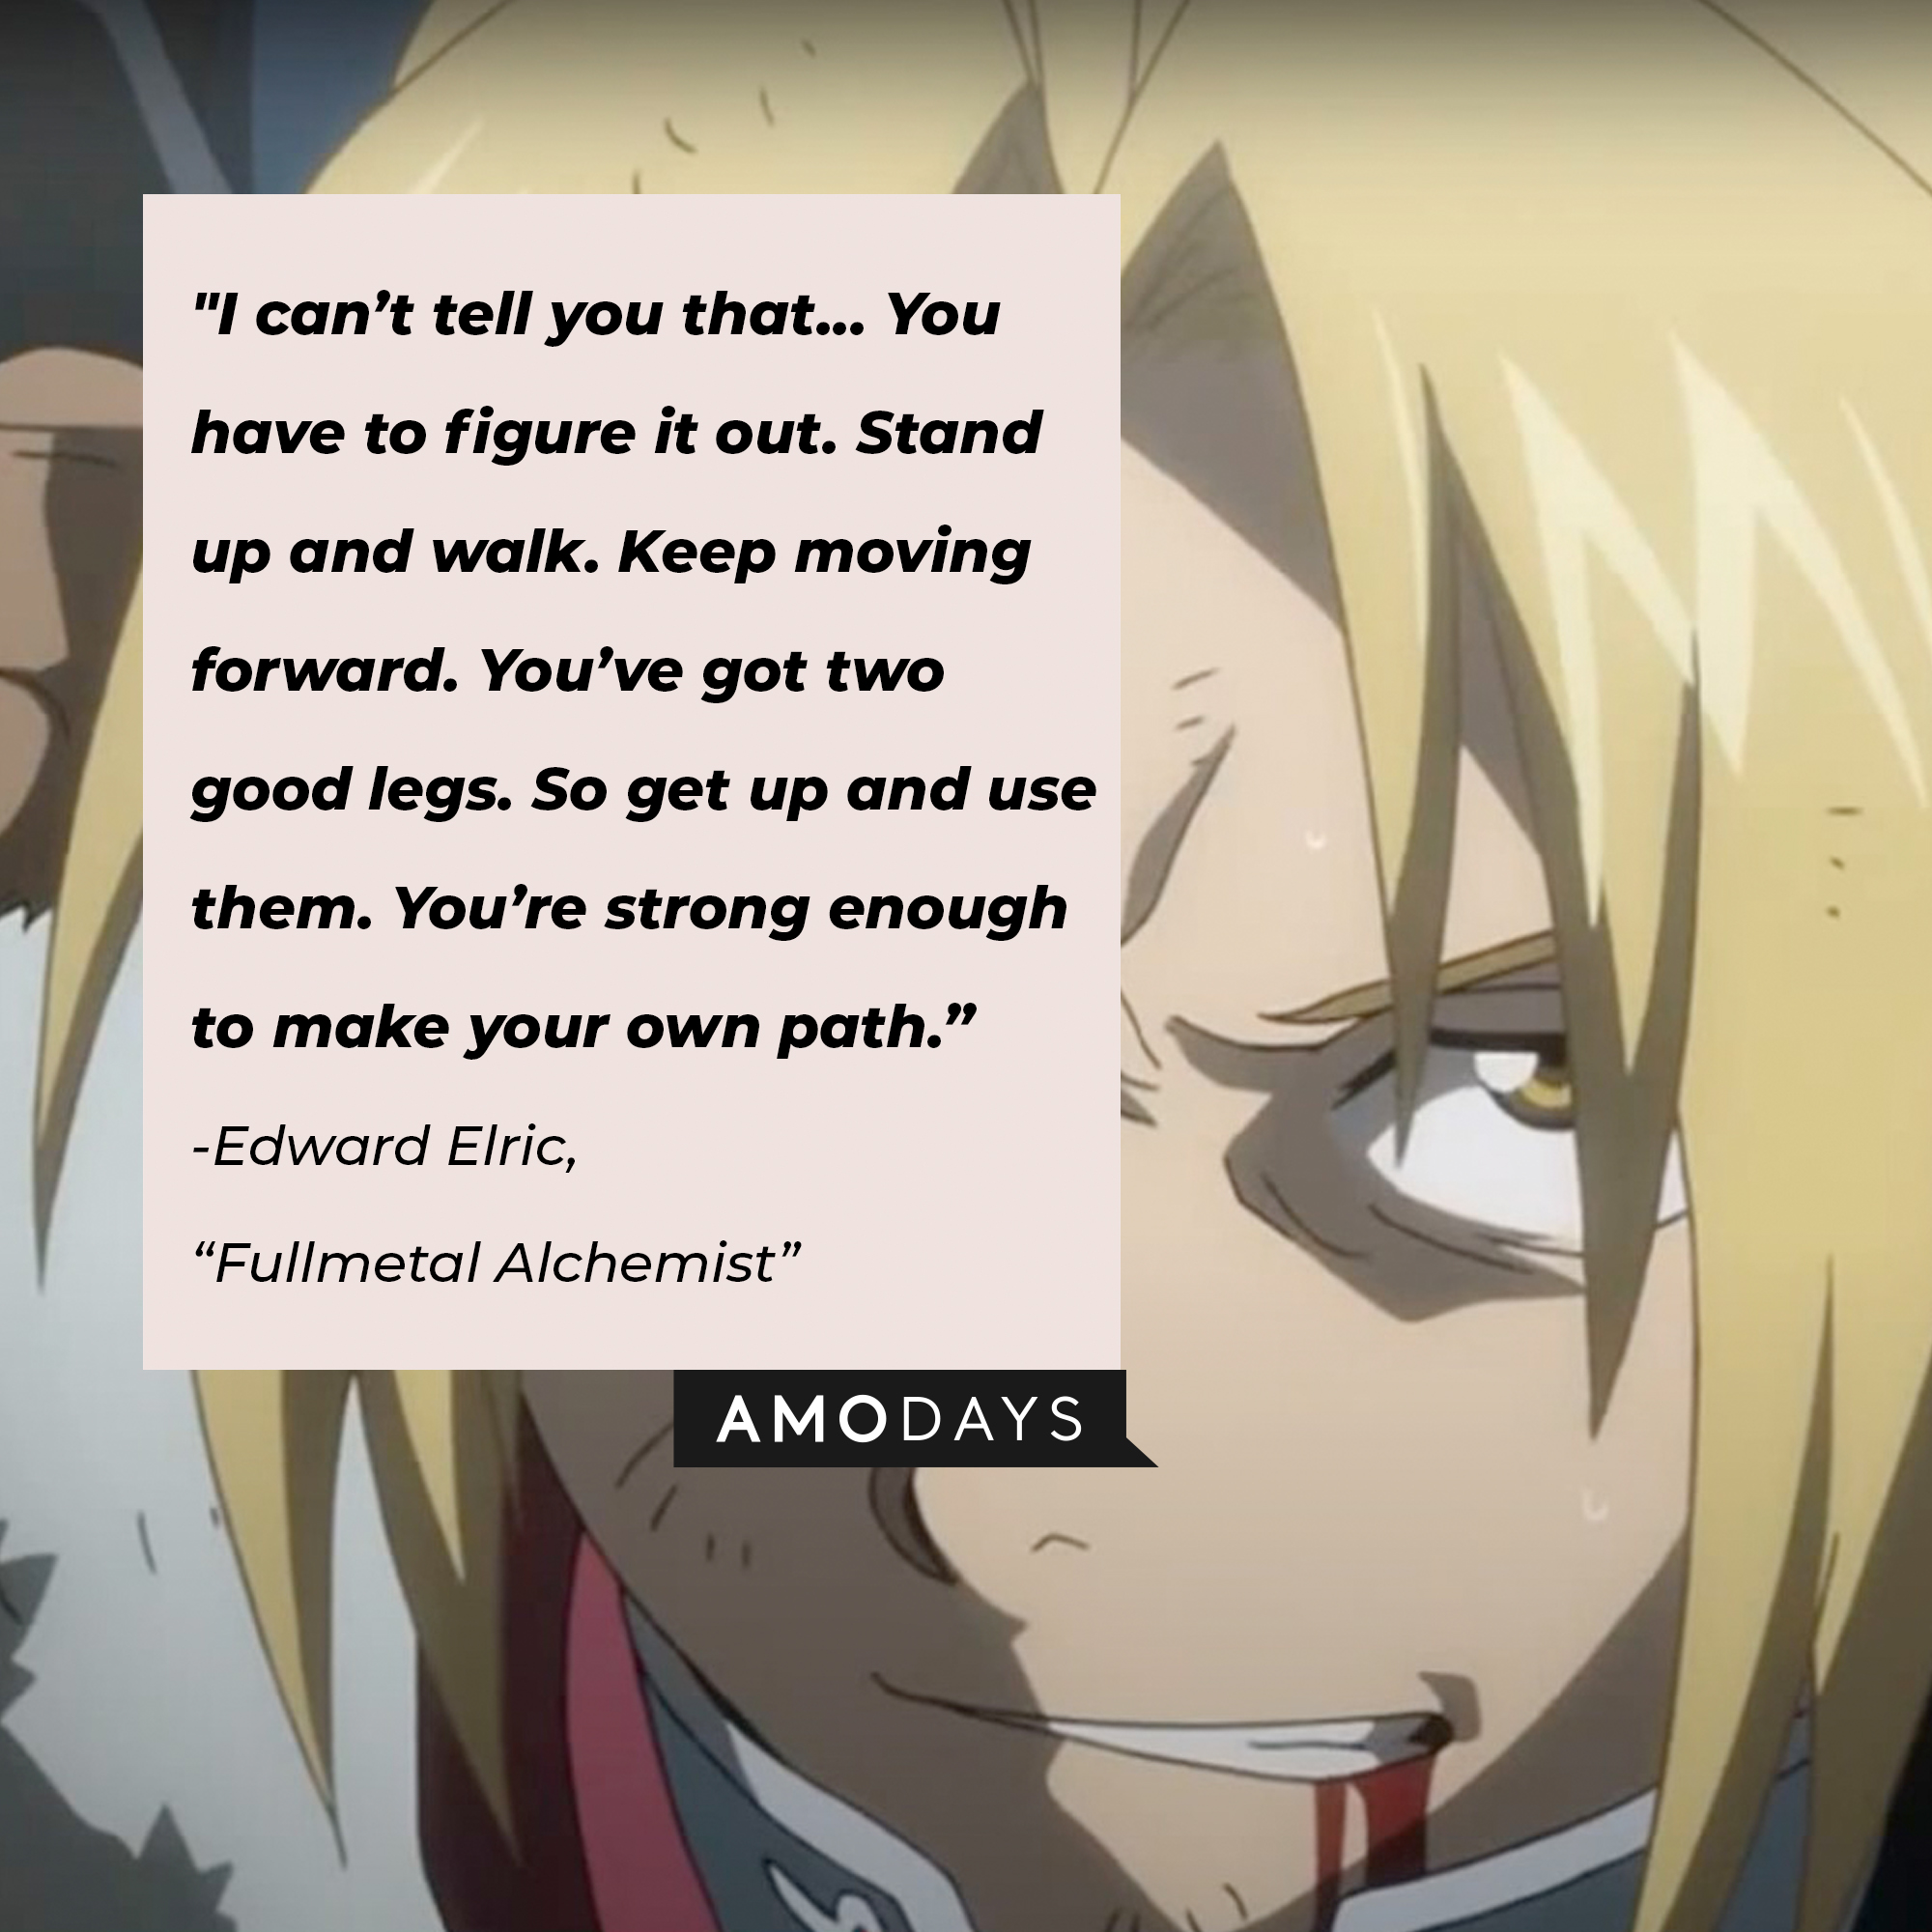 Edward Elric's quote: "I can’t tell you that… You have to figure it out. Stand up and walk. Keep moving forward. You’ve got two good legs. So get up and use them. You’re strong enough to make your own path.” | Image: facebook.com/FMAHiromuArakawa